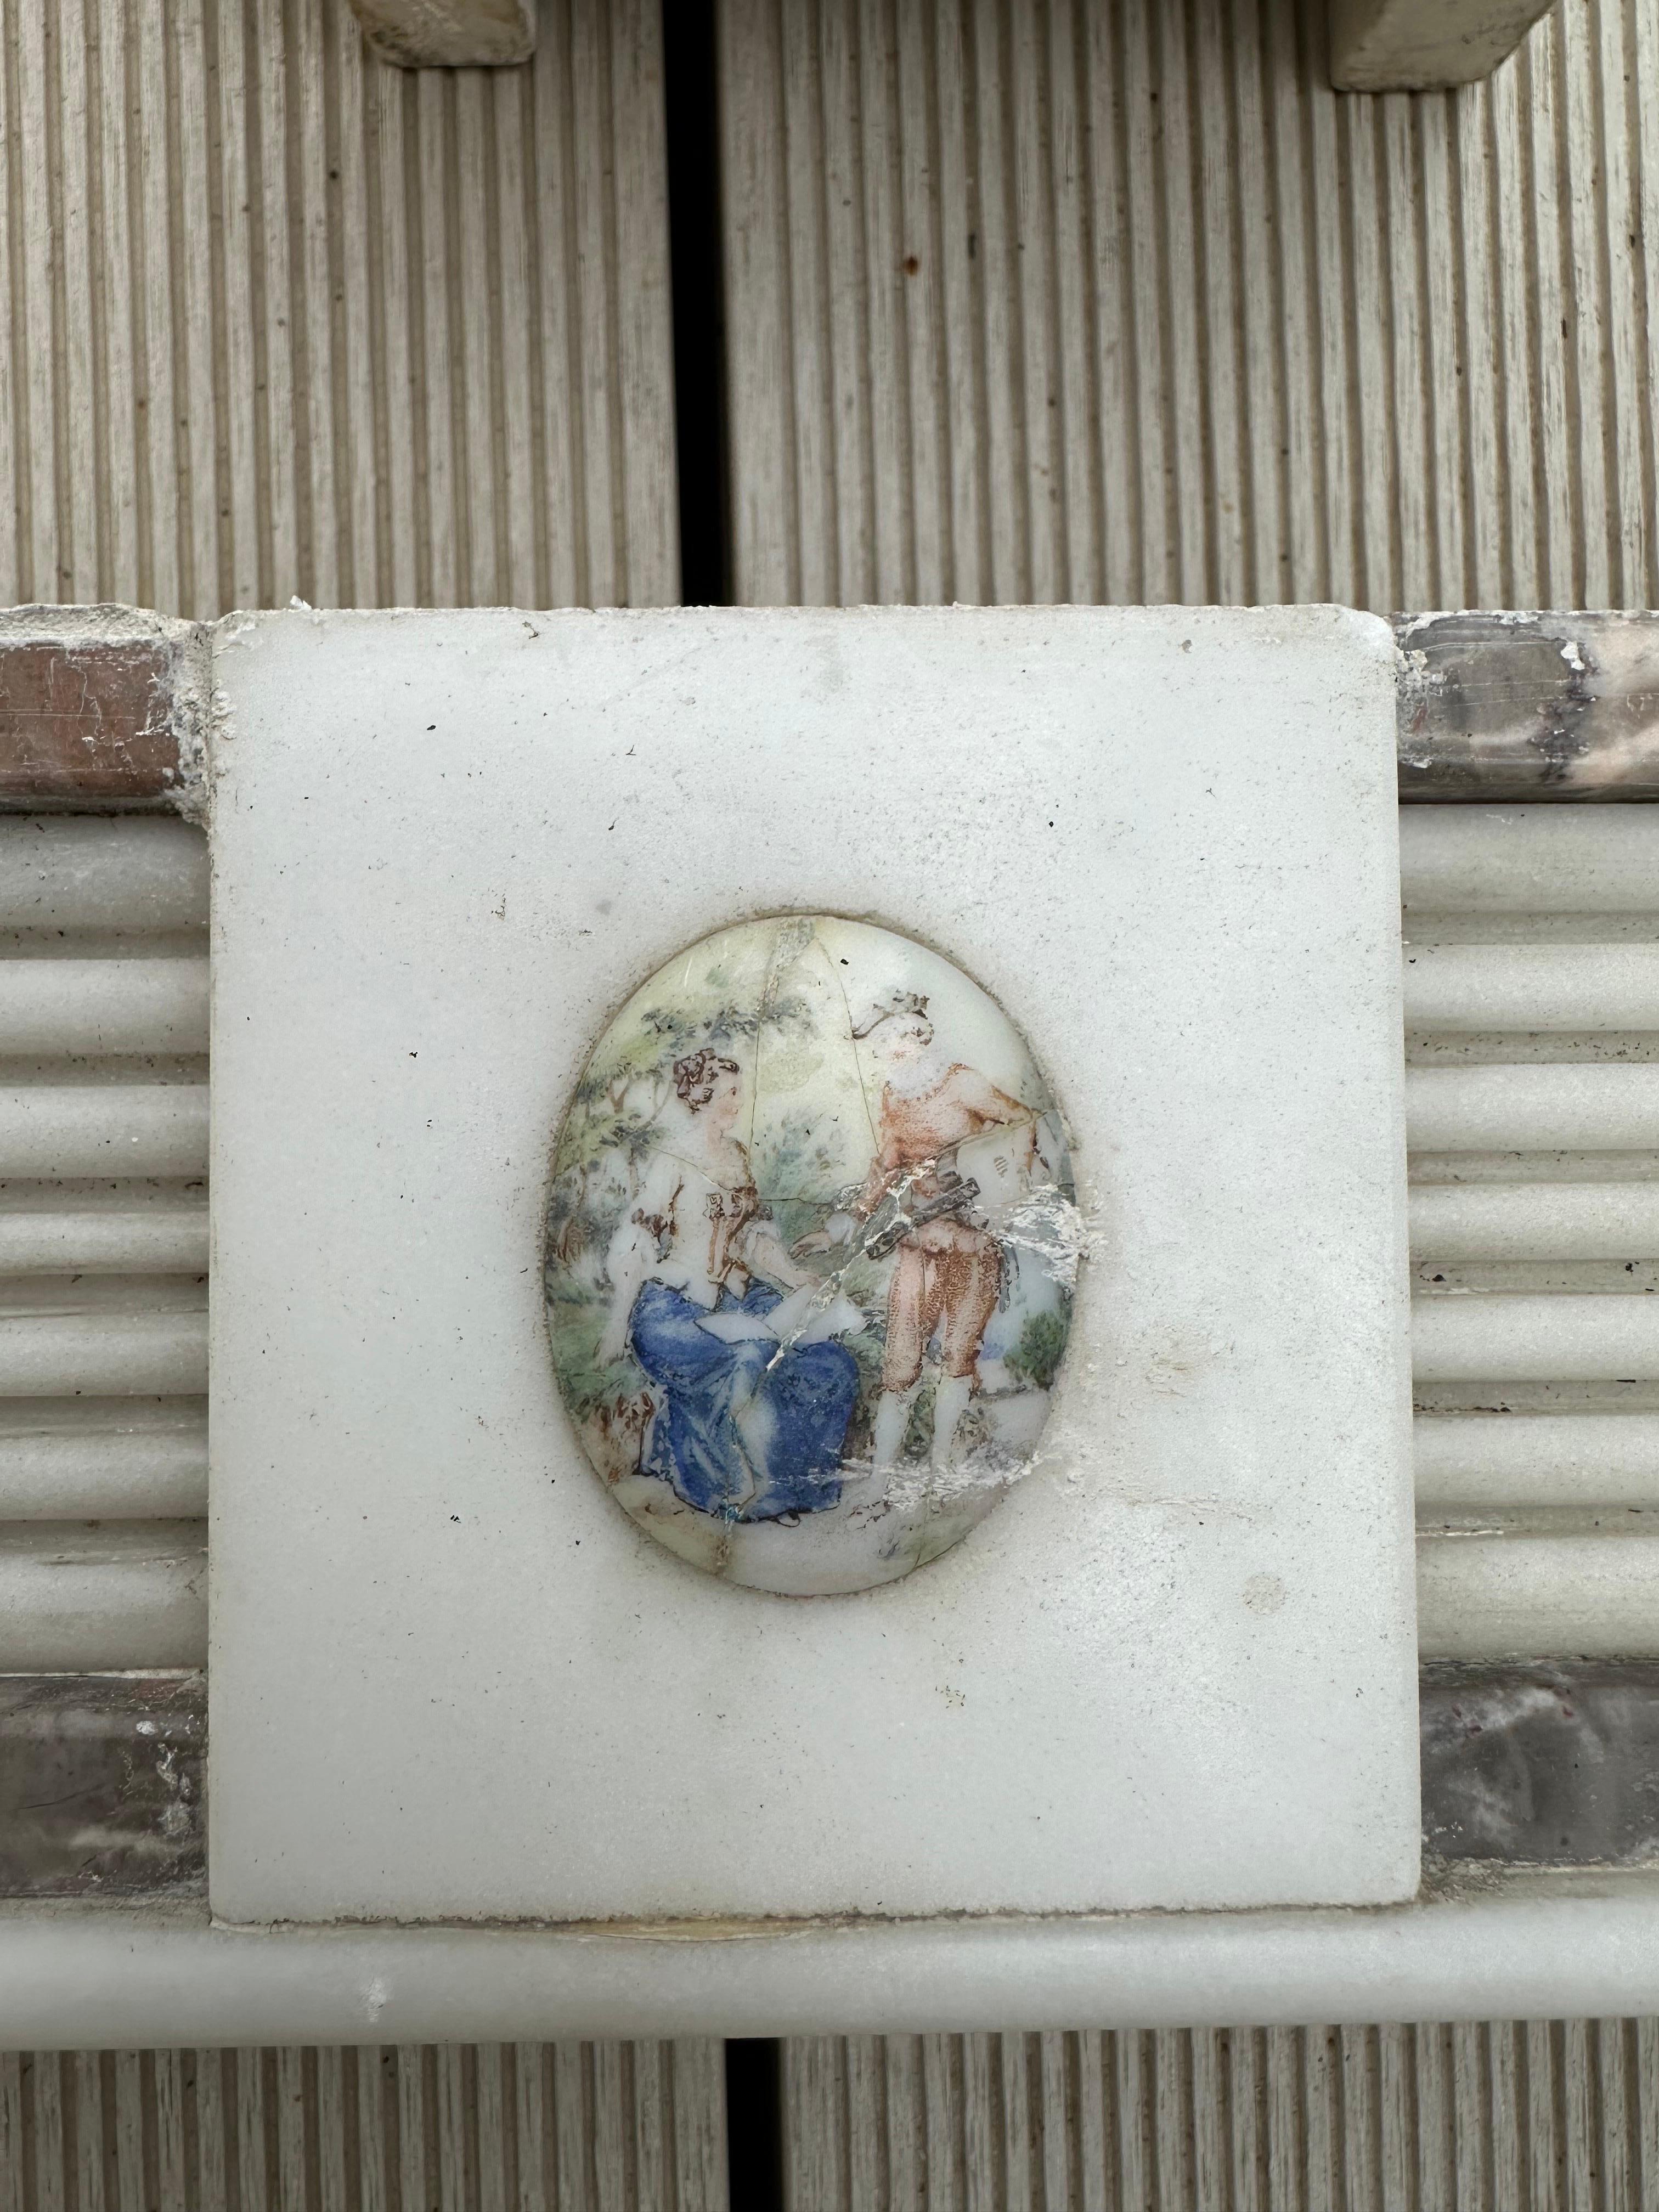 19th Century Edwardian Statutory Marble Mantel Piece In Good Condition For Sale In Southall, GB